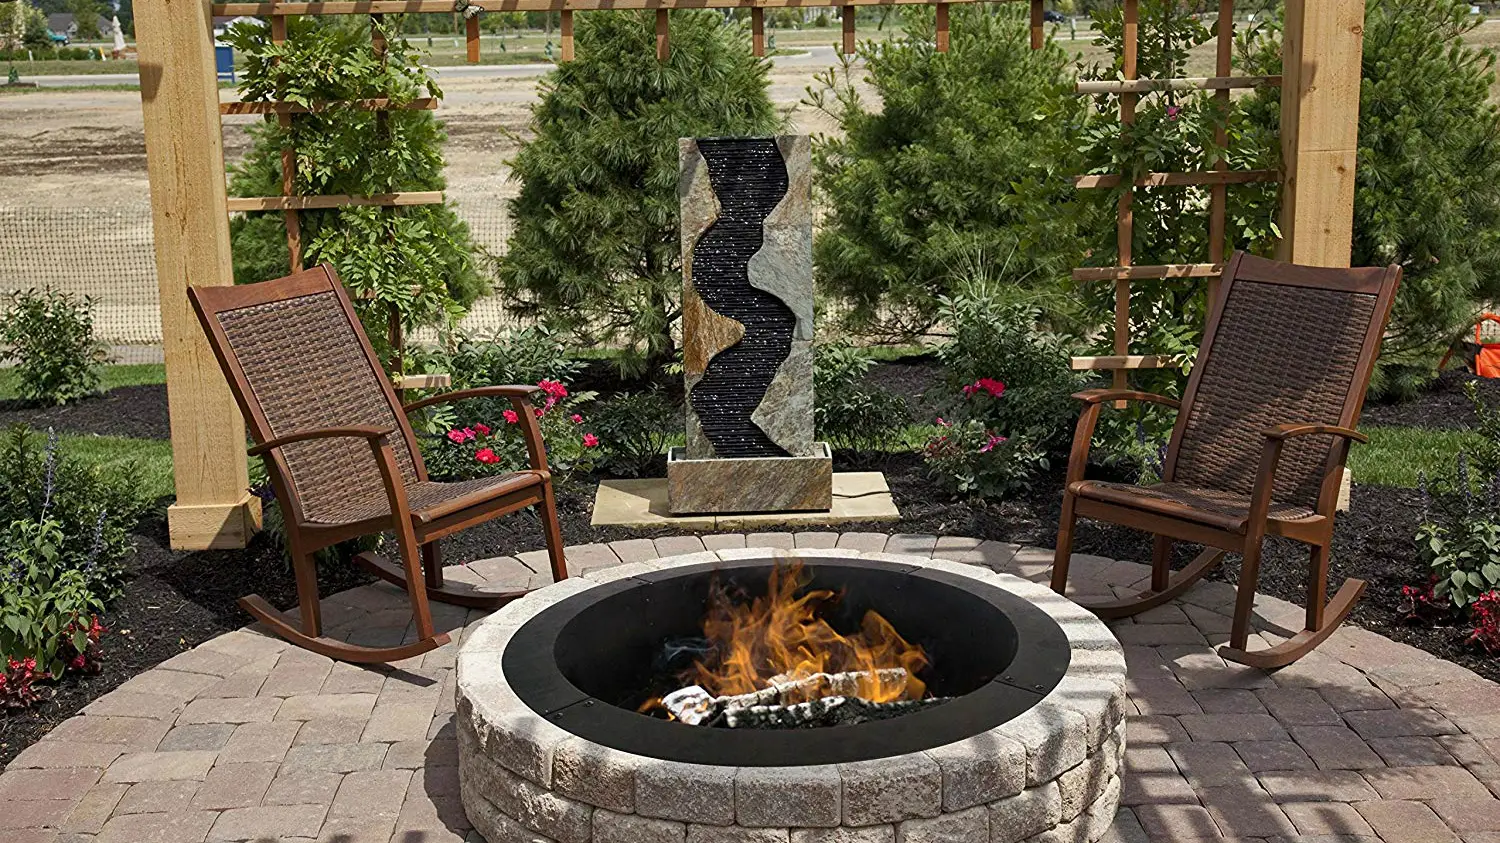 Best Fire Pit Liners And Rings, 30 Inch Fire Pit Insert